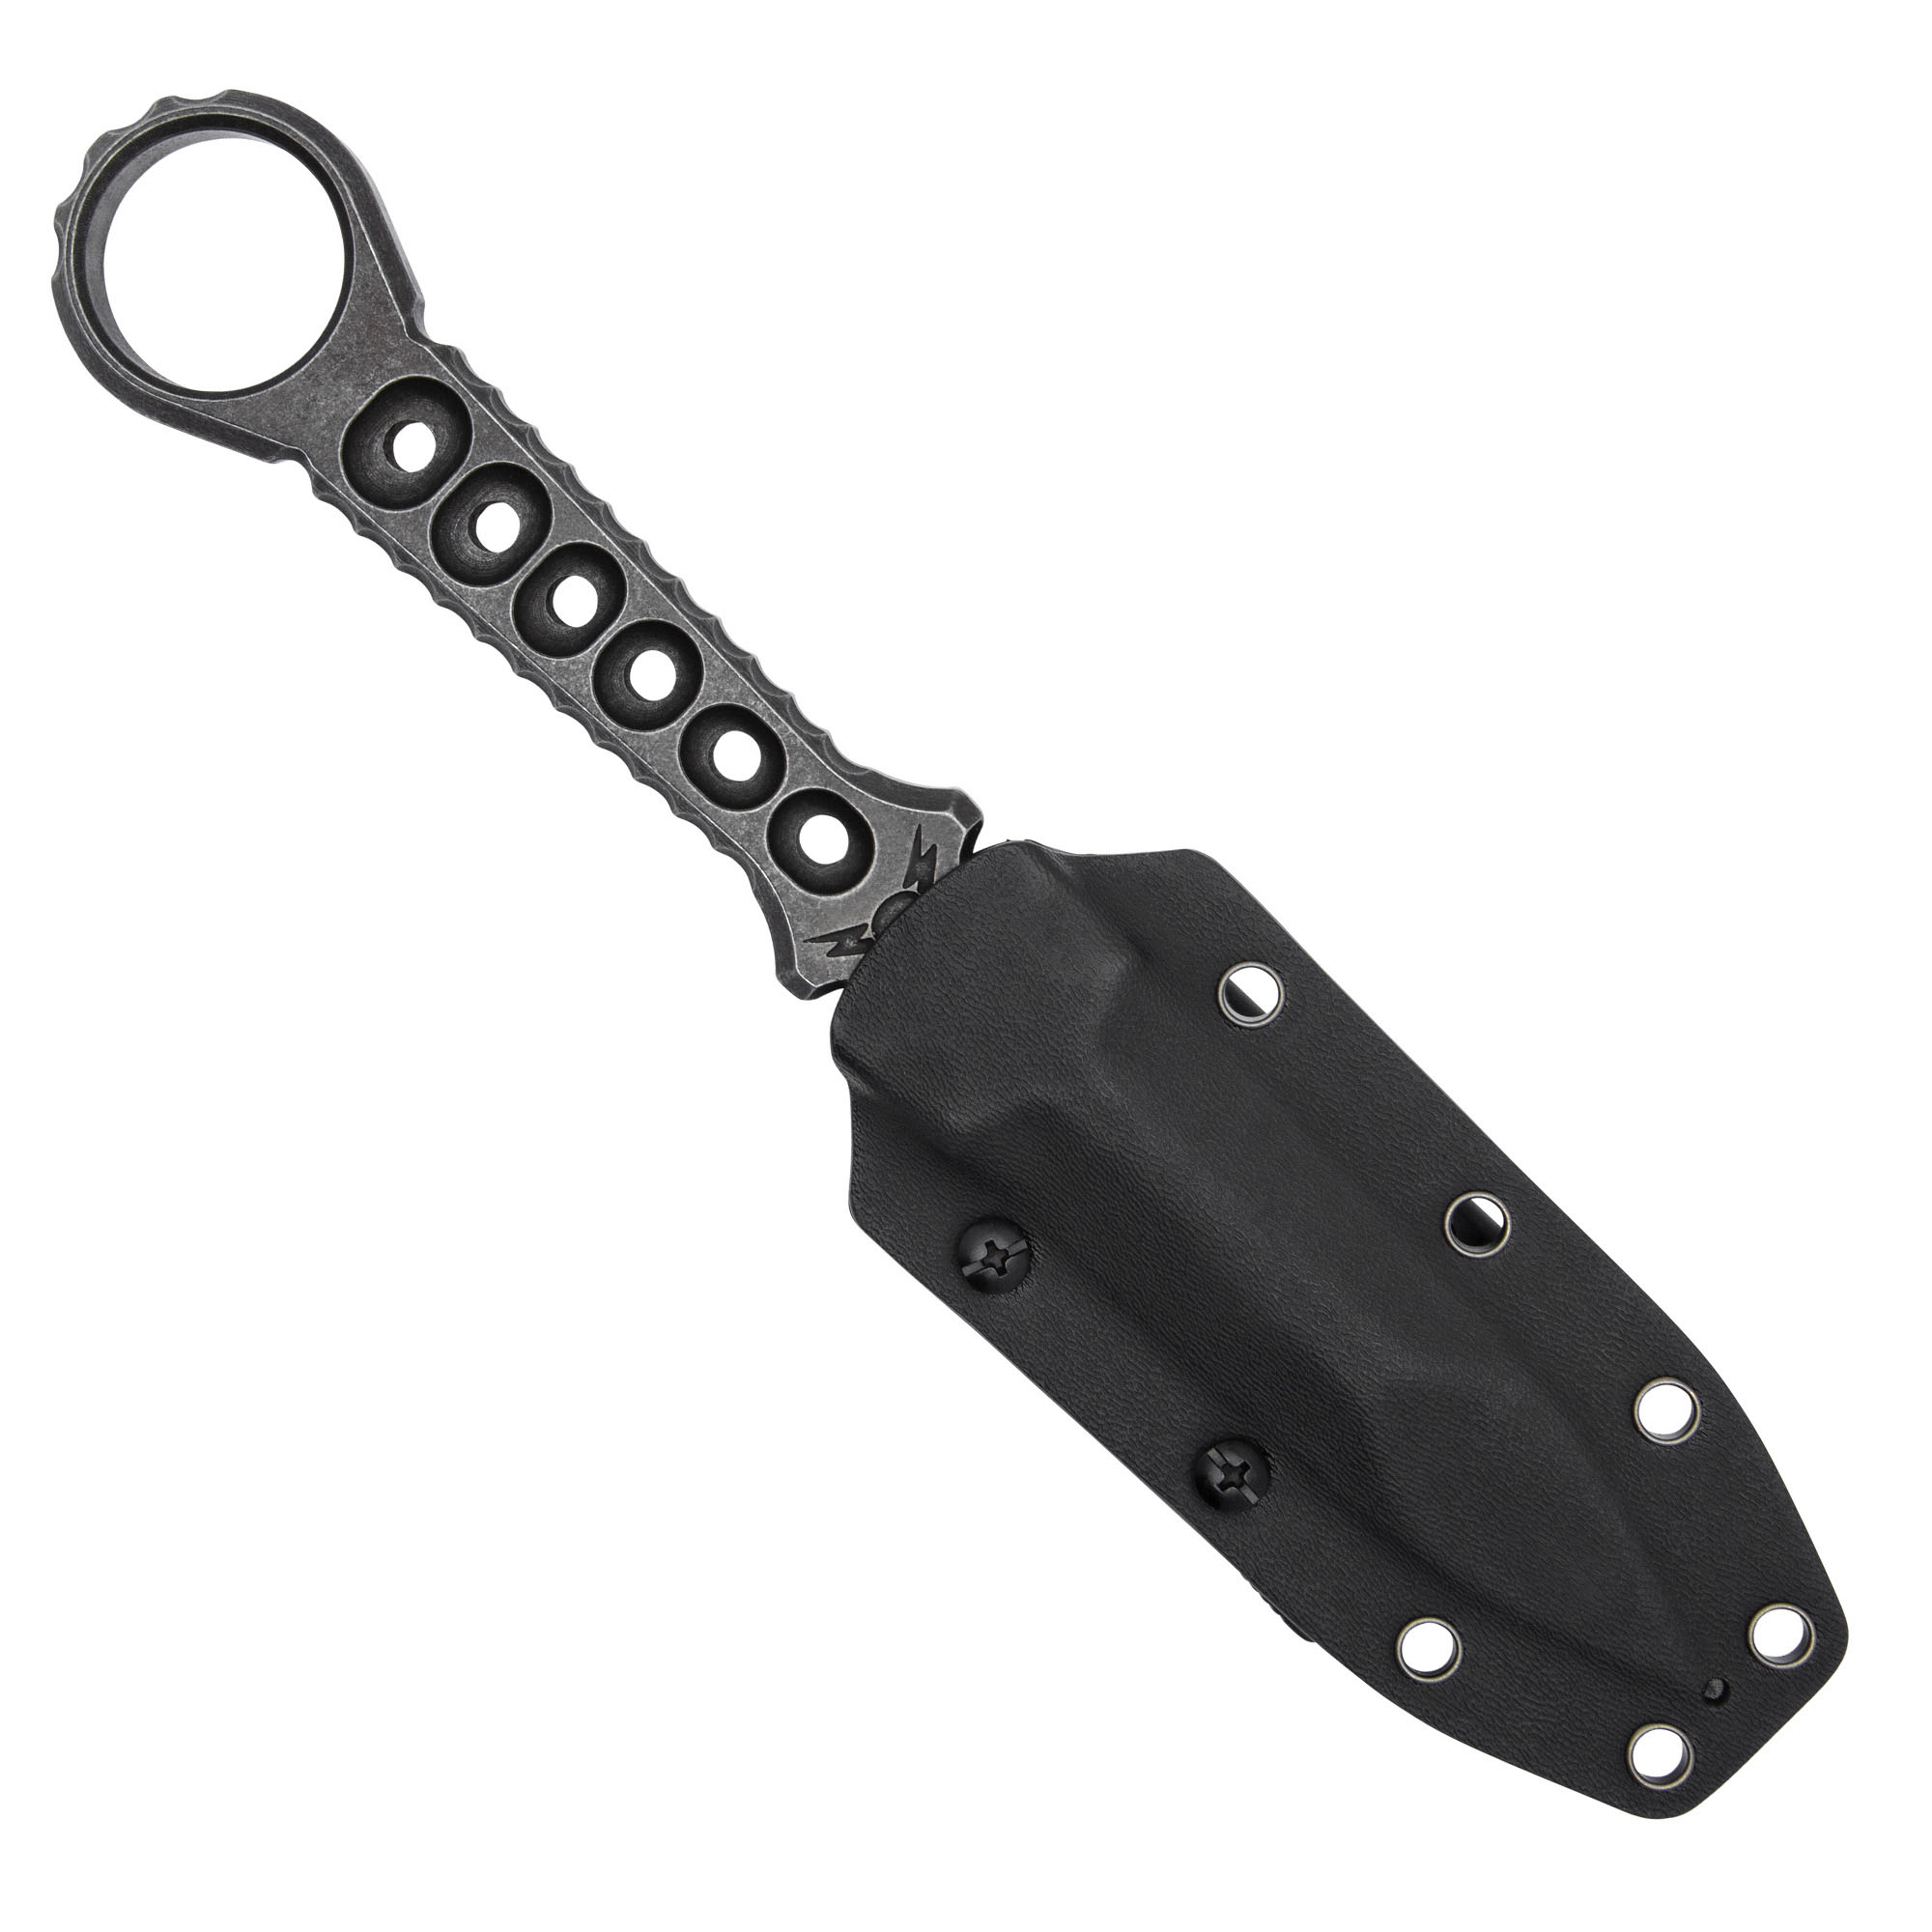 M48 OPS Tanker Combat Dagger with Sheath